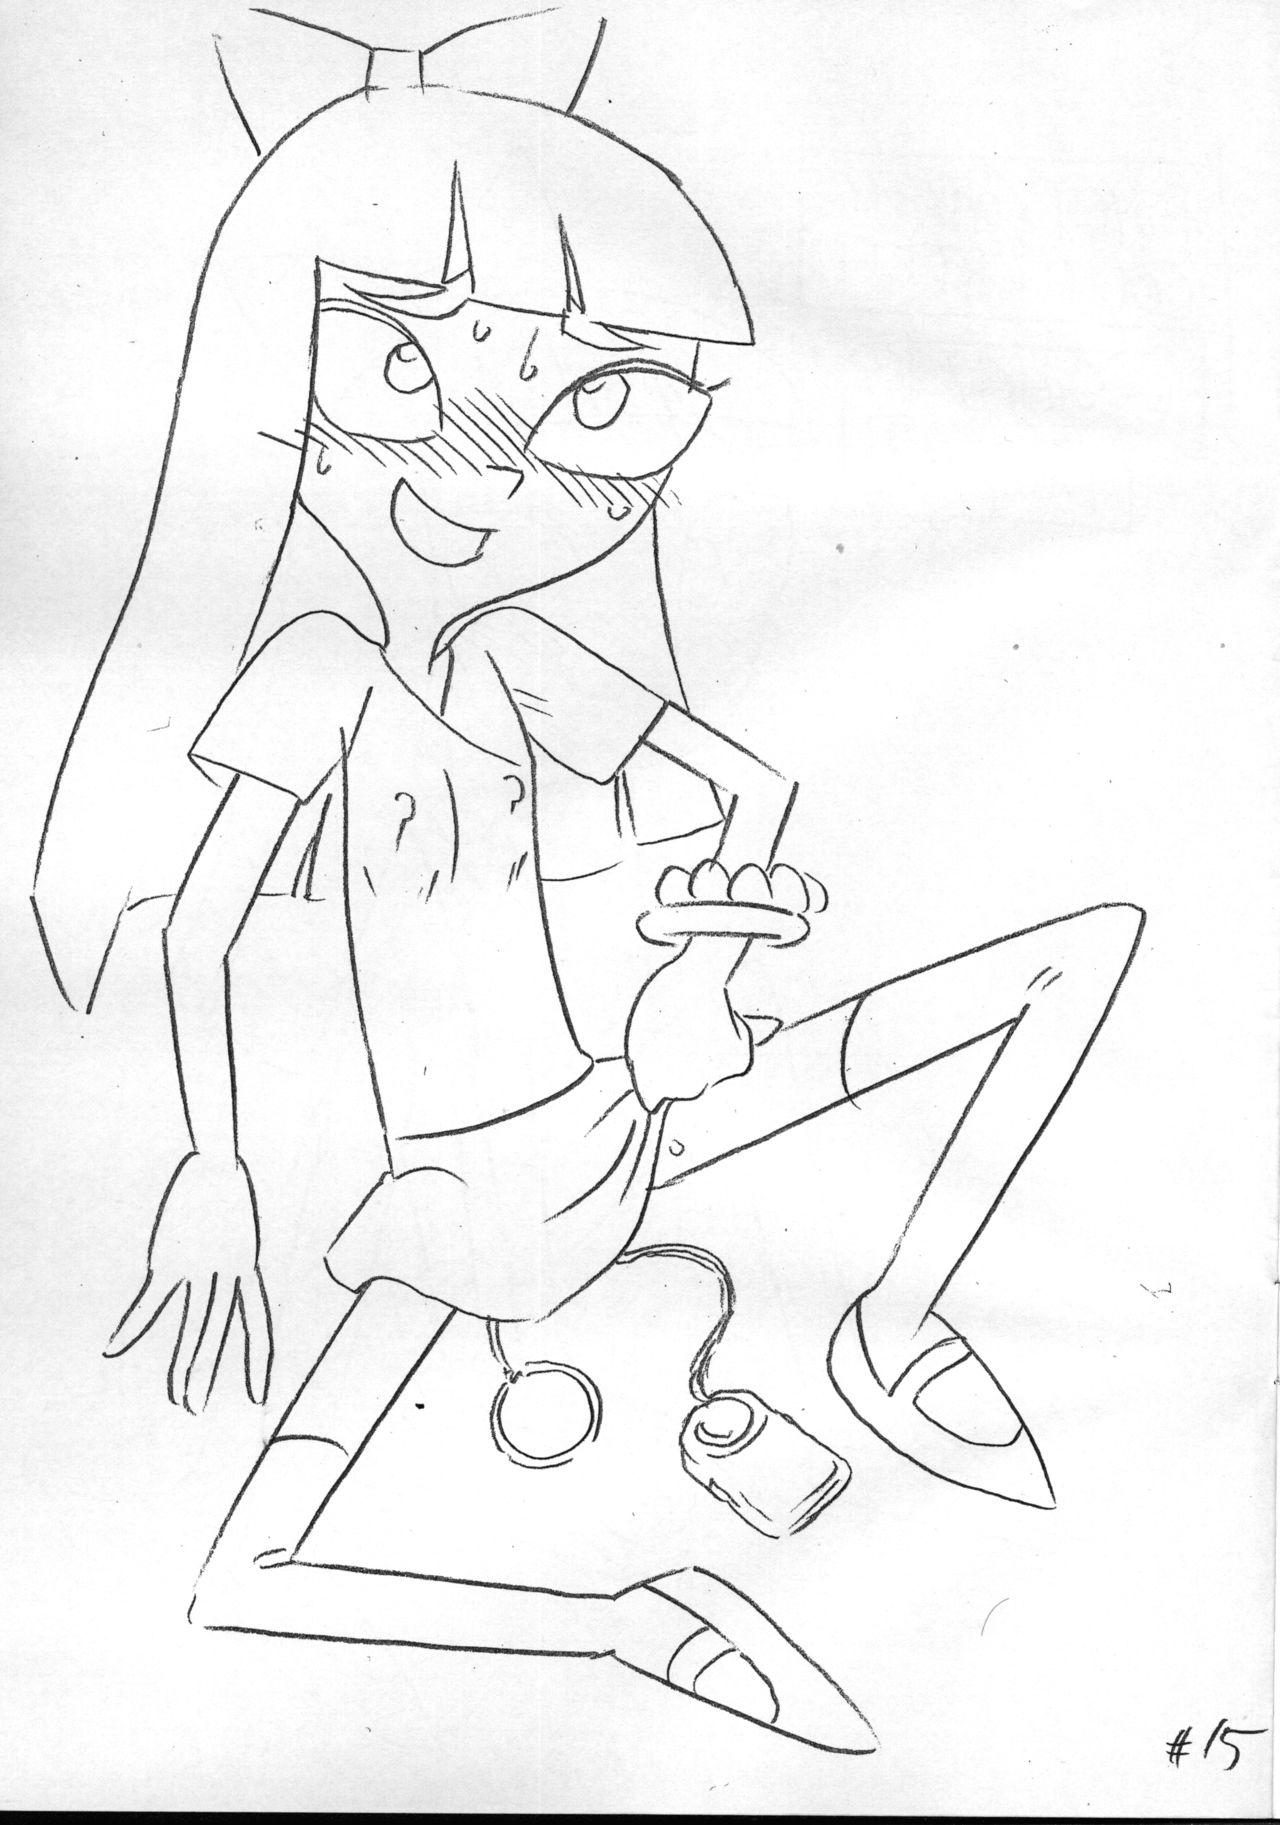 Hardcore Fuck Psychosomatic Counterfeit Ex: Stacy in Early Age - Phineas and ferb Big - Page 14